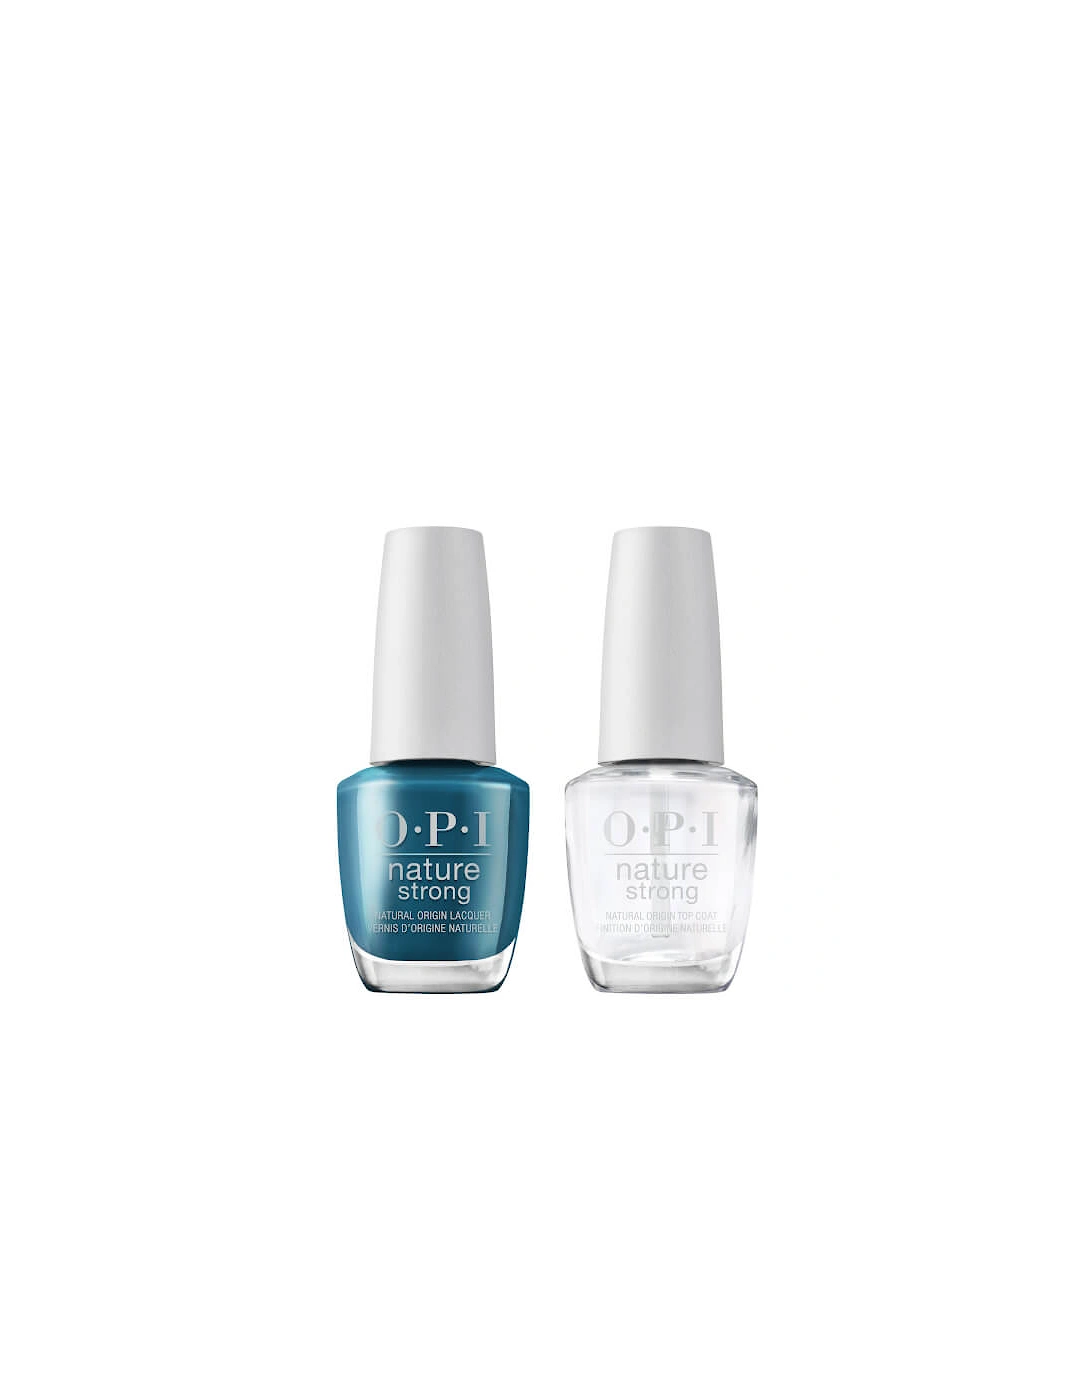 Nature Strong Natural Vegan Nail Polish Duo - All Heal Queen Mother Earth, 2 of 1